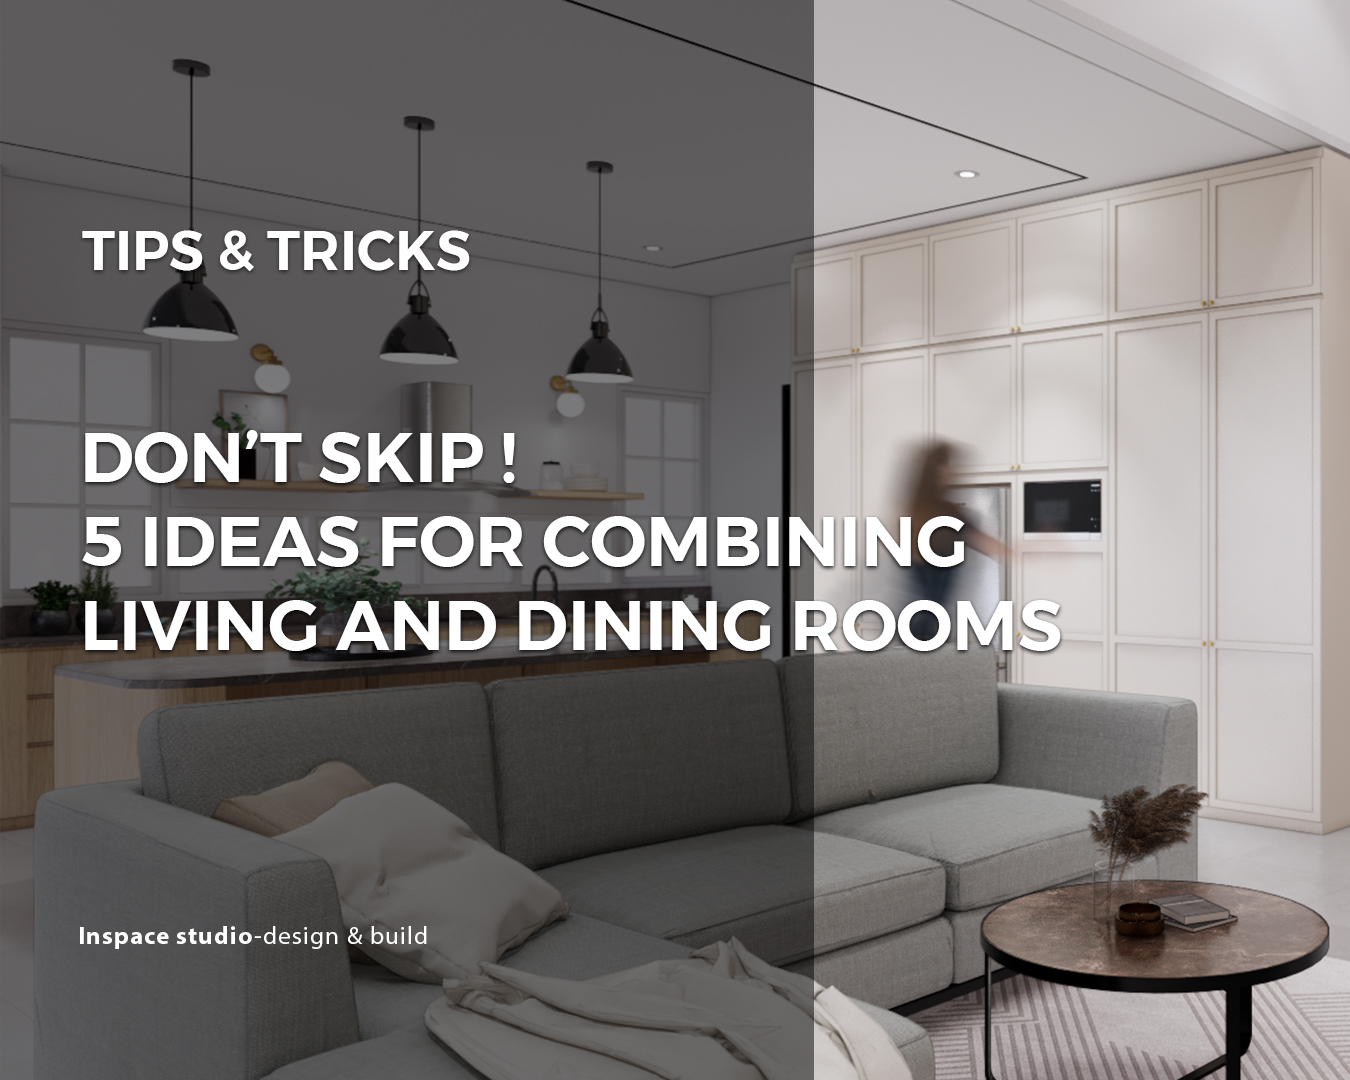 Don’t Skip! 5 Ideas for combining living and dining rooms!